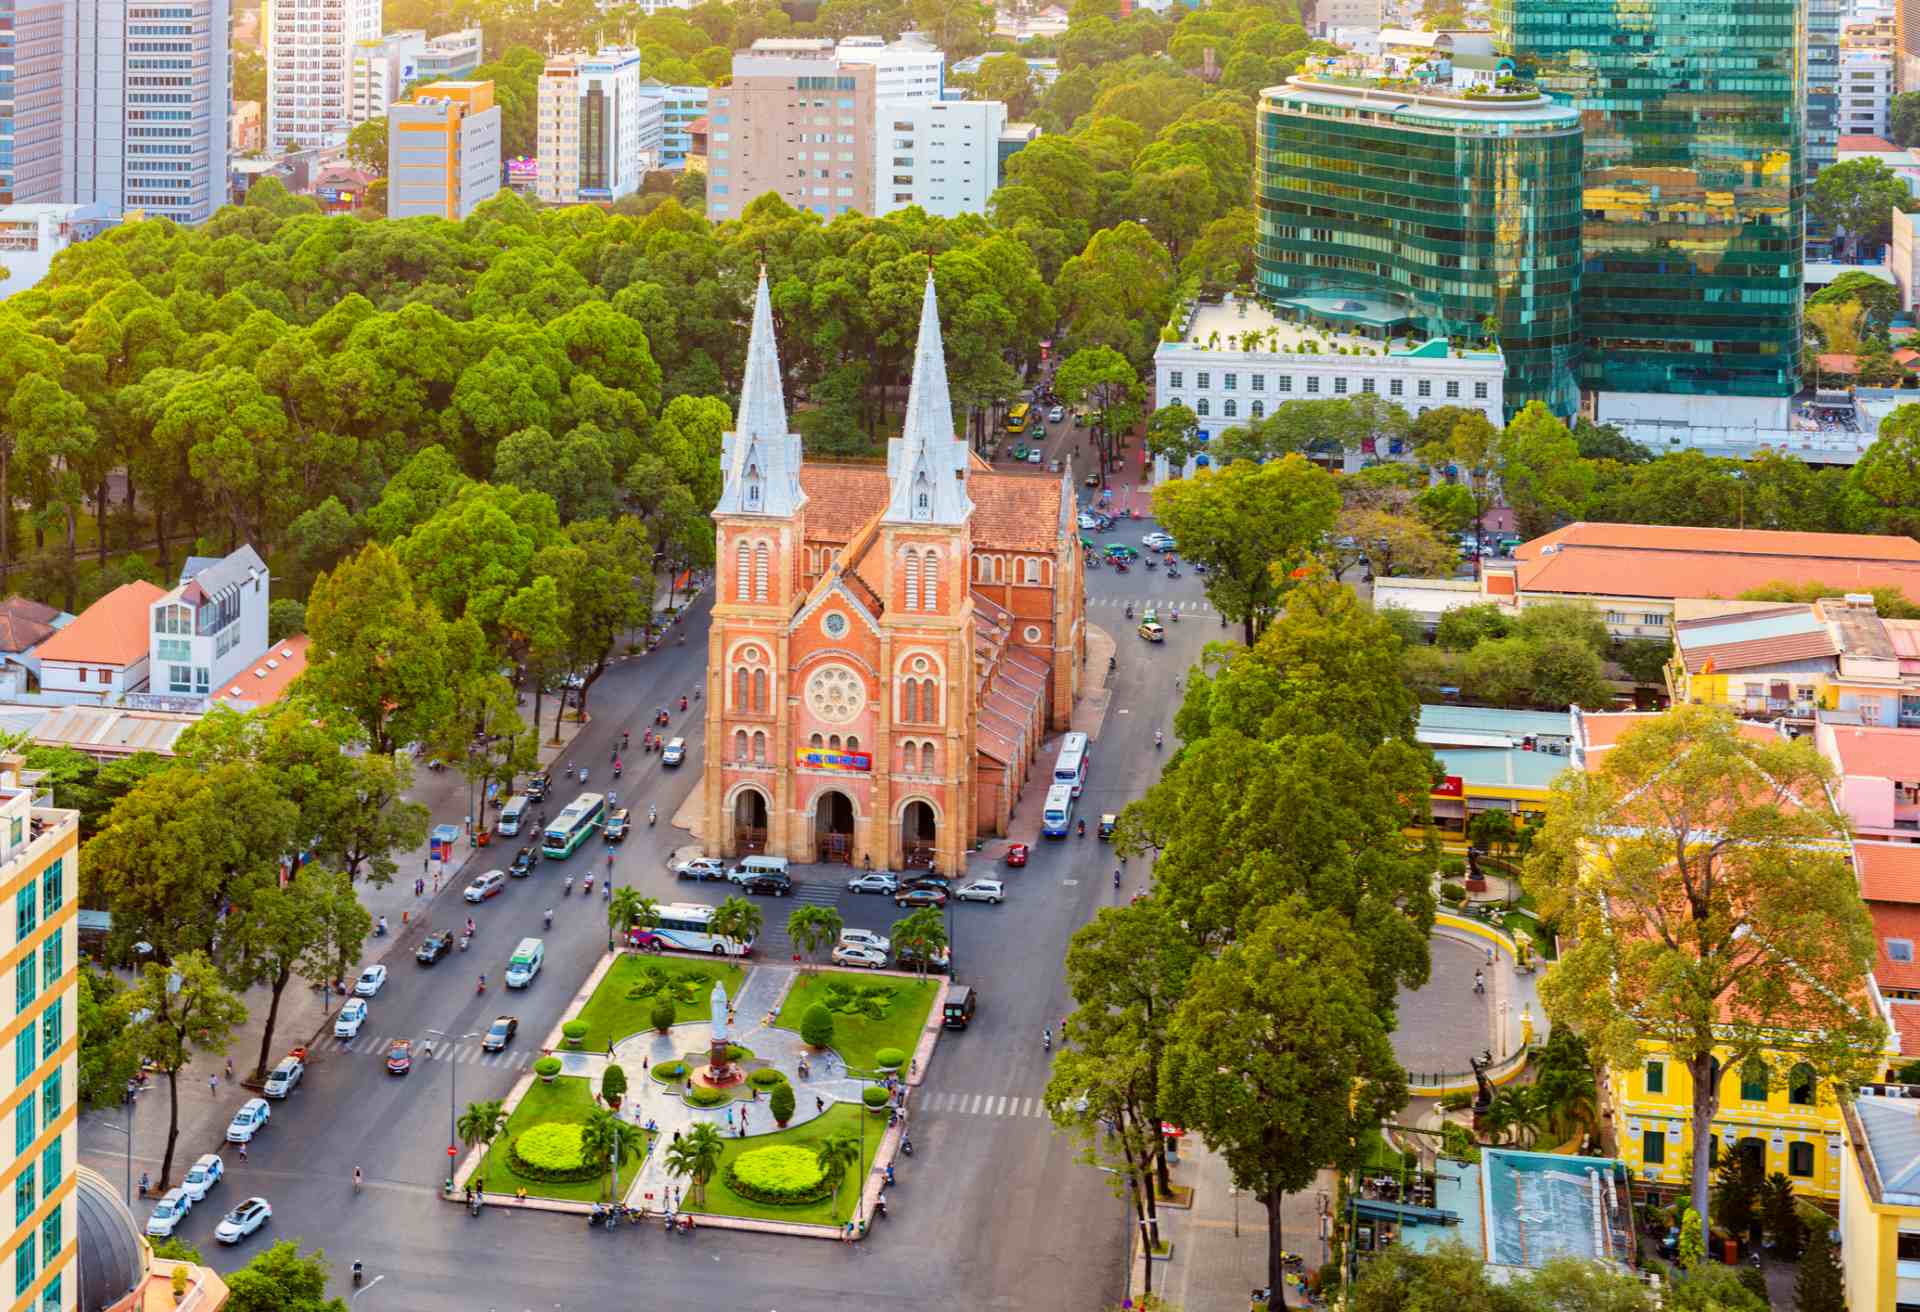 Notre Dame Cathedral in Ho Chi Minh City, Vietnam